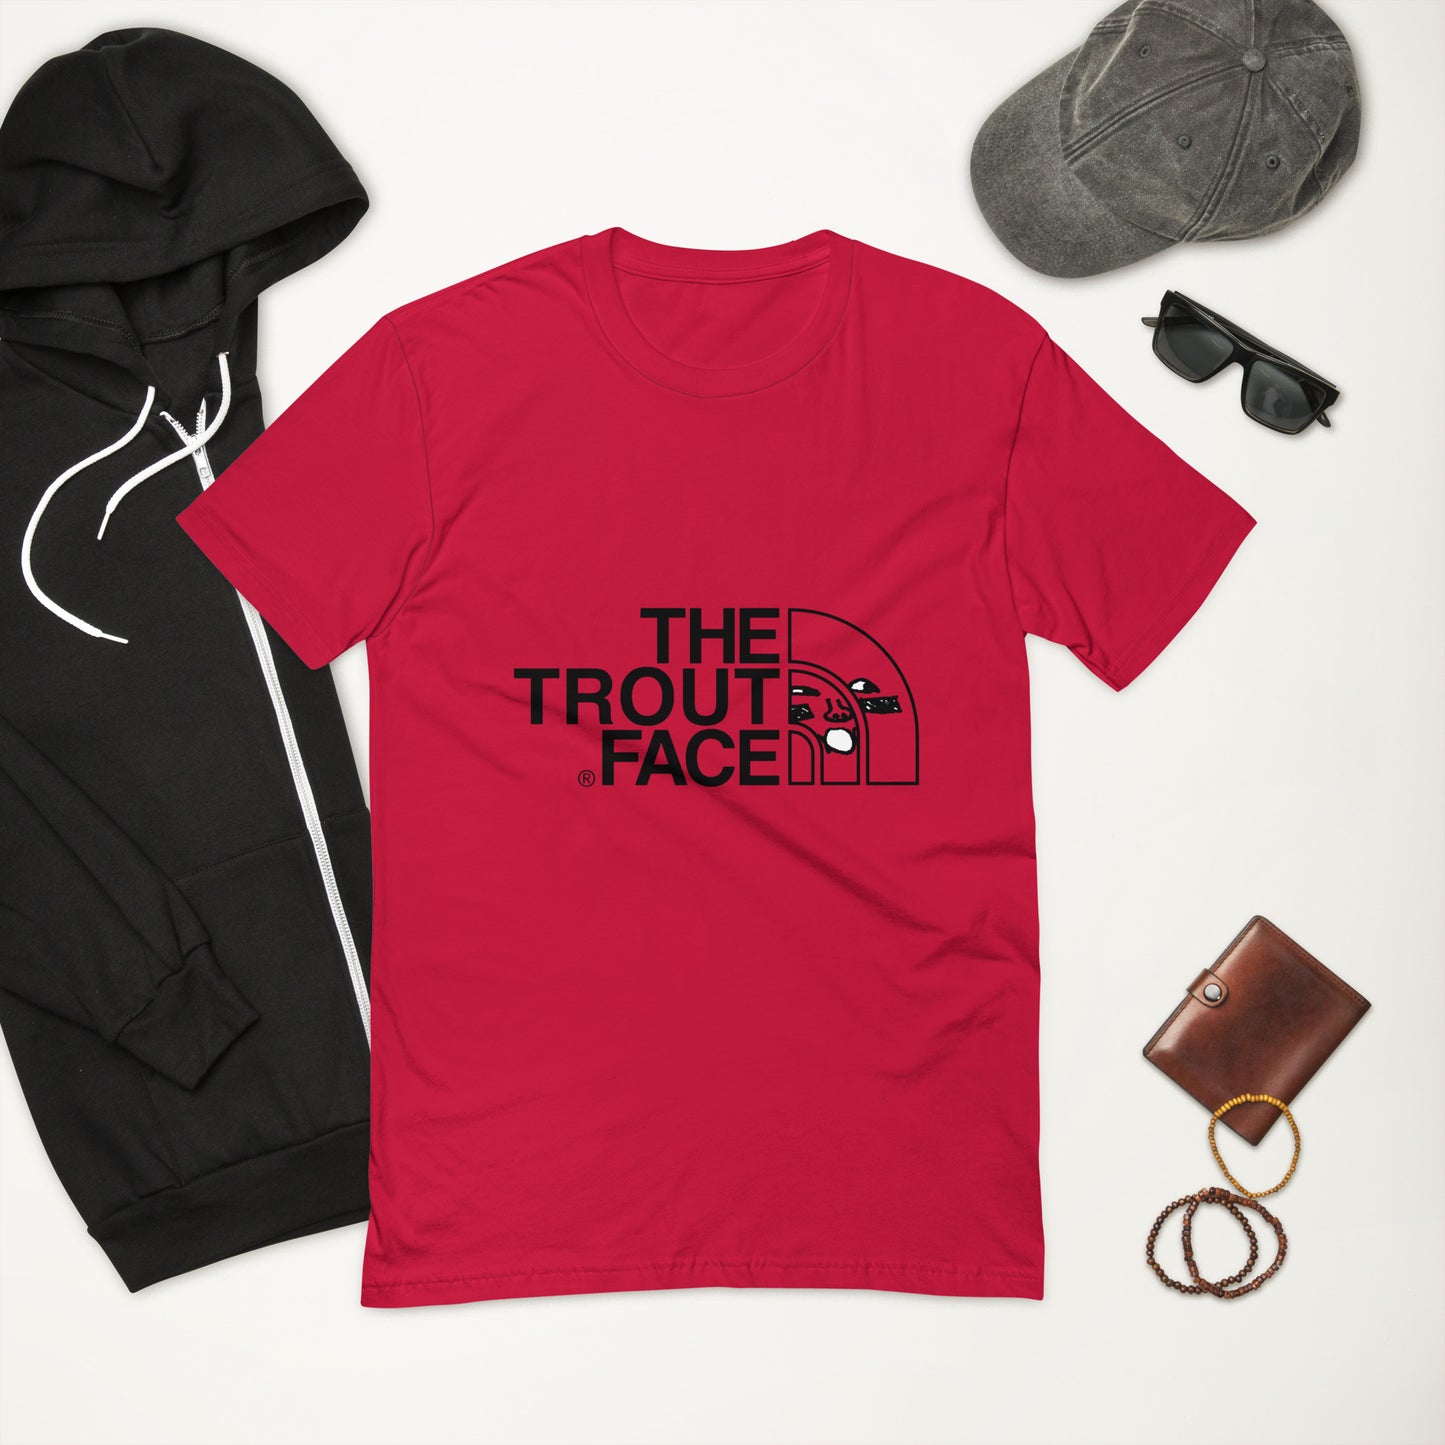 The Trout Face T-shirt